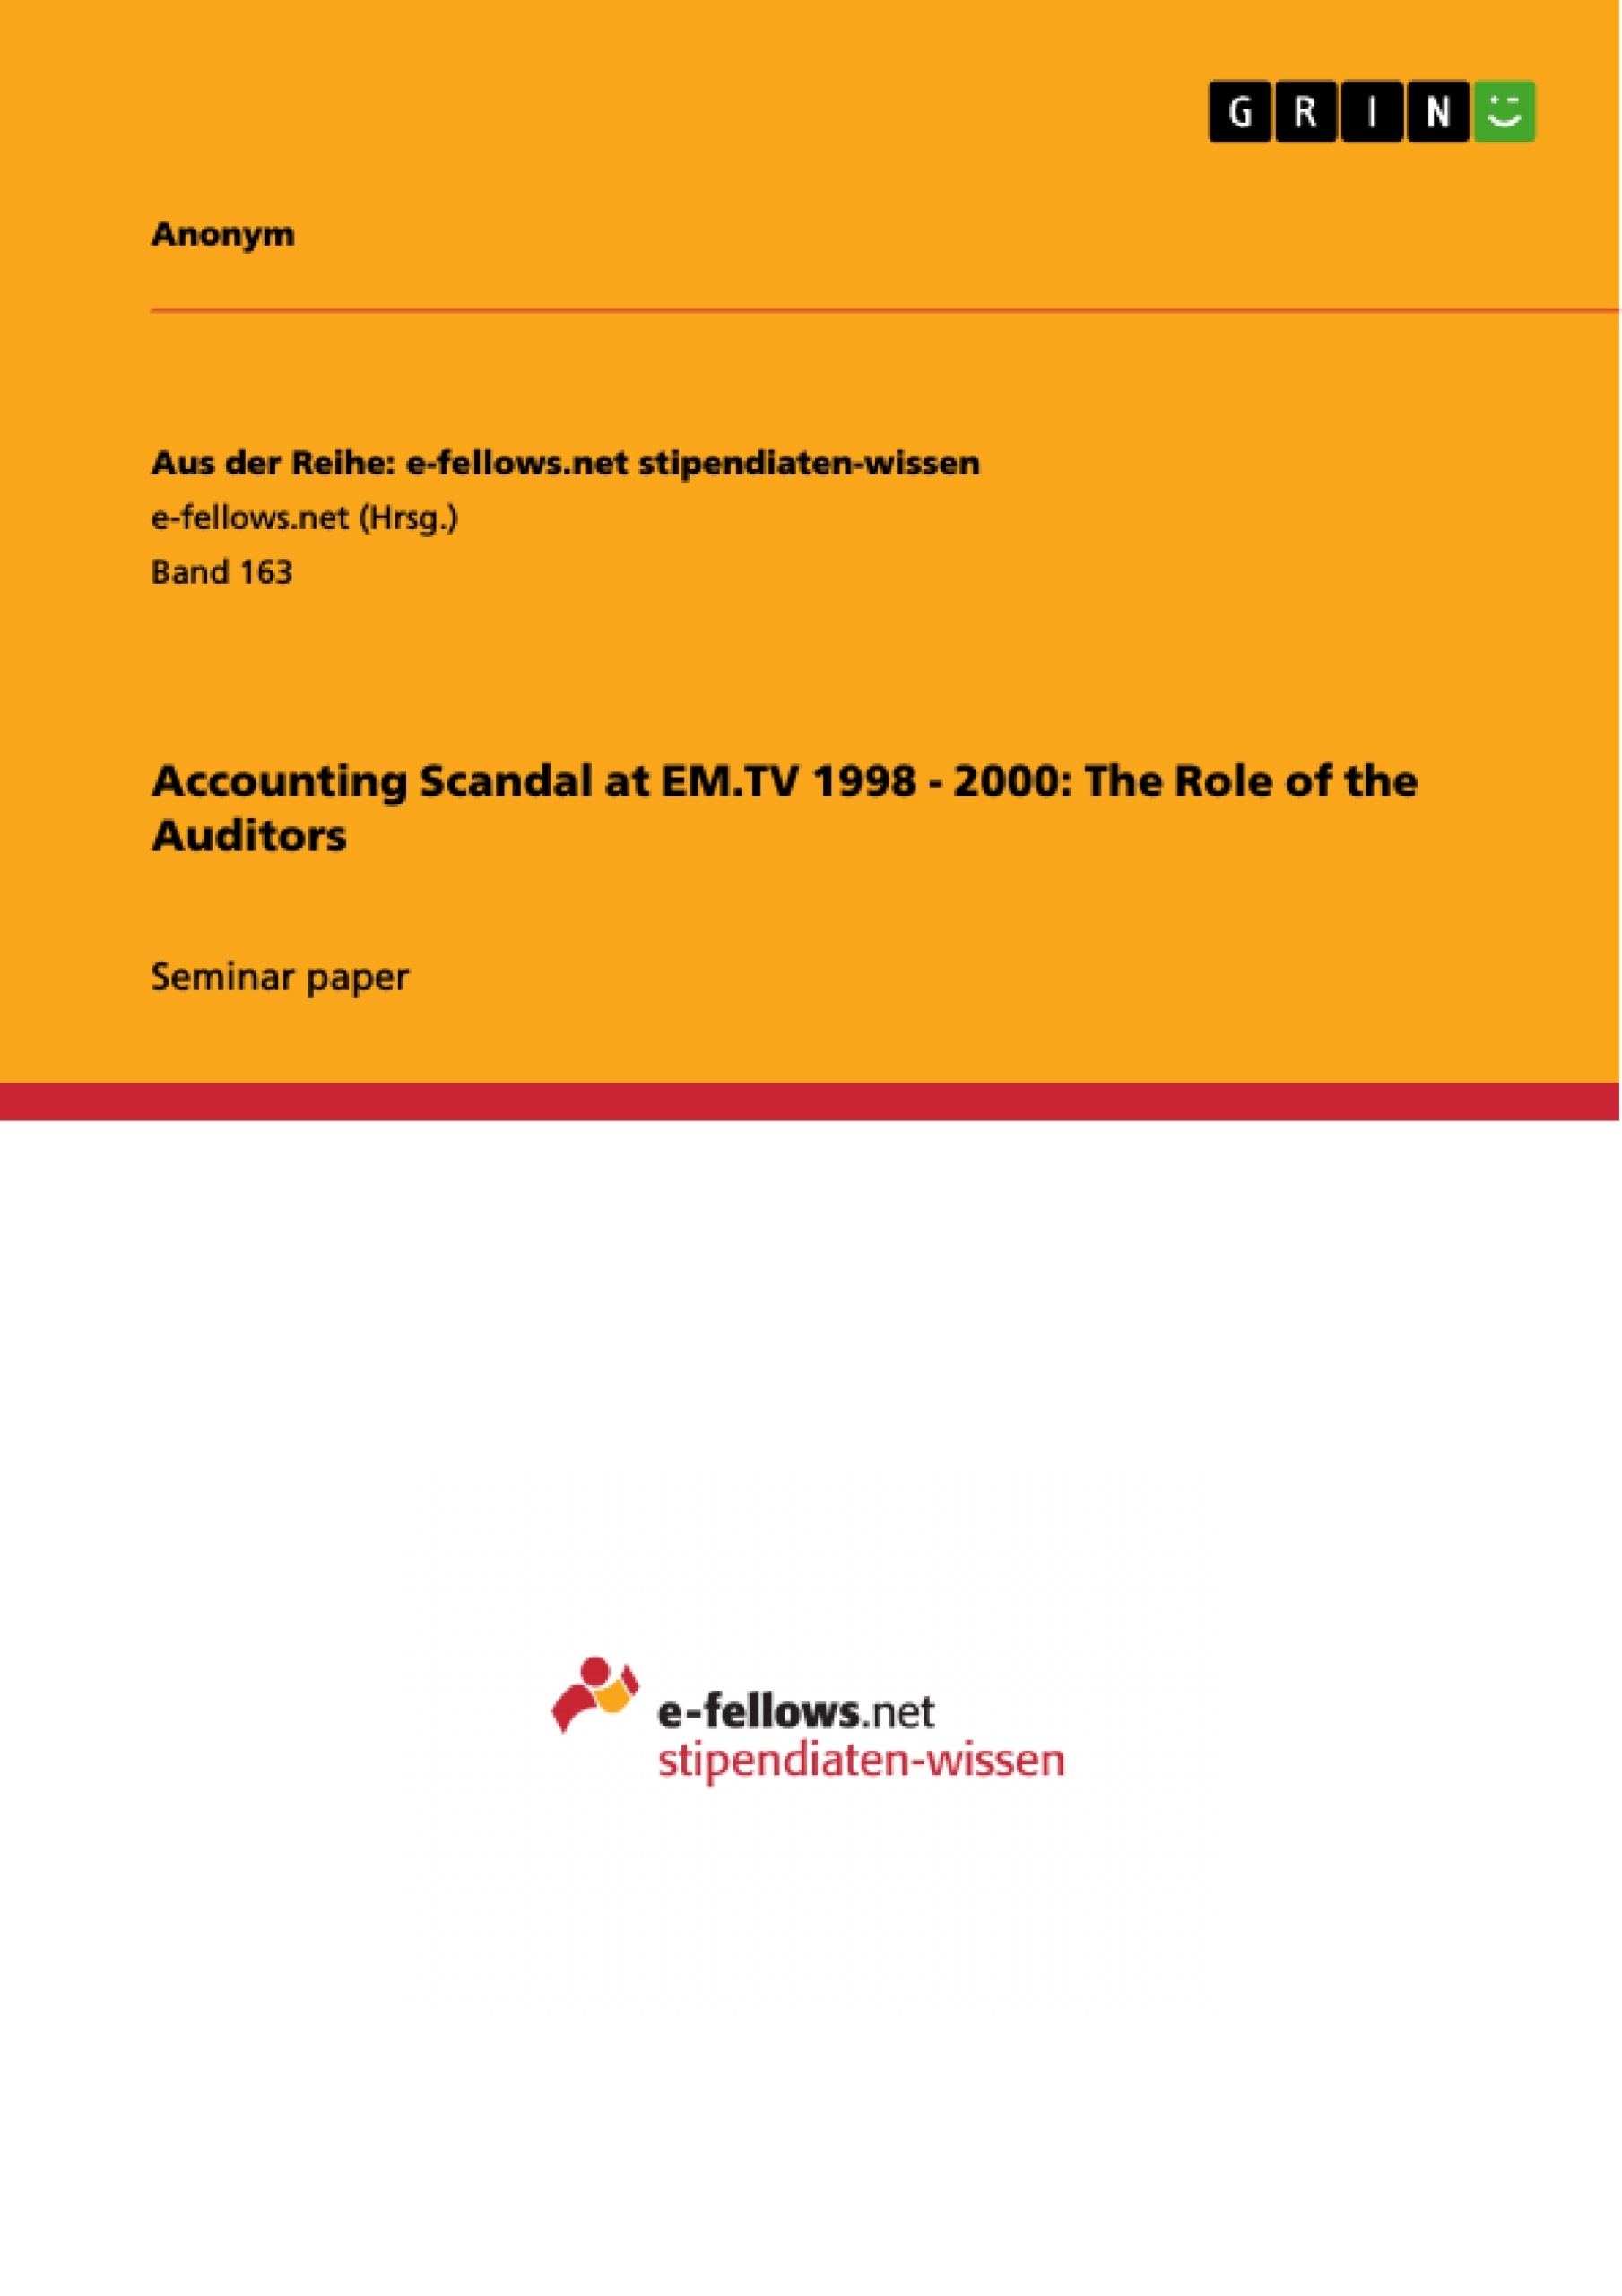 Titel: Accounting Scandal at EM.TV 1998 - 2000: The Role of the Auditors